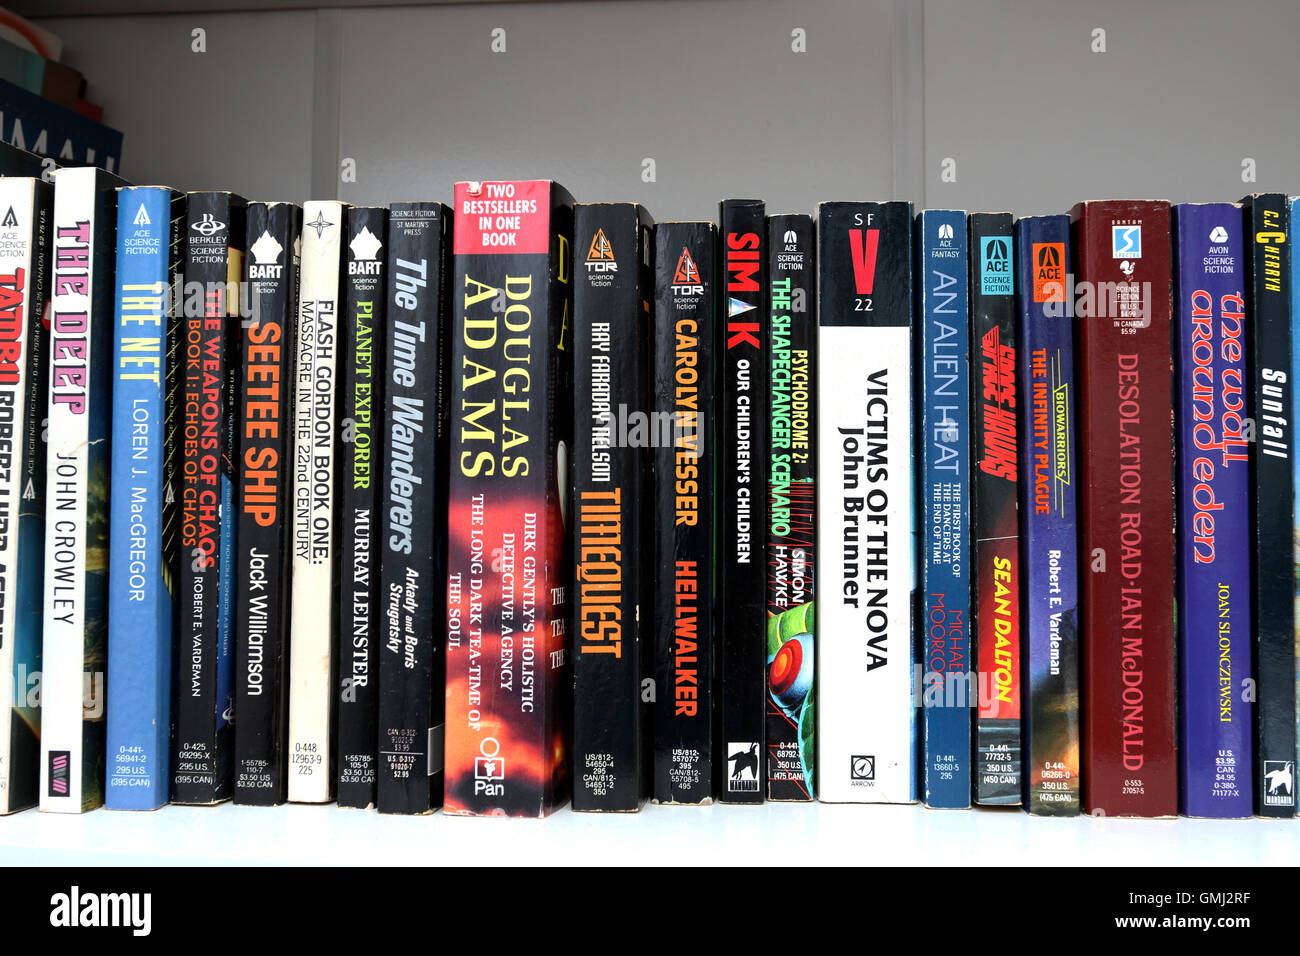 Science Fiction and Fantasy books on book shelf Stock Photo